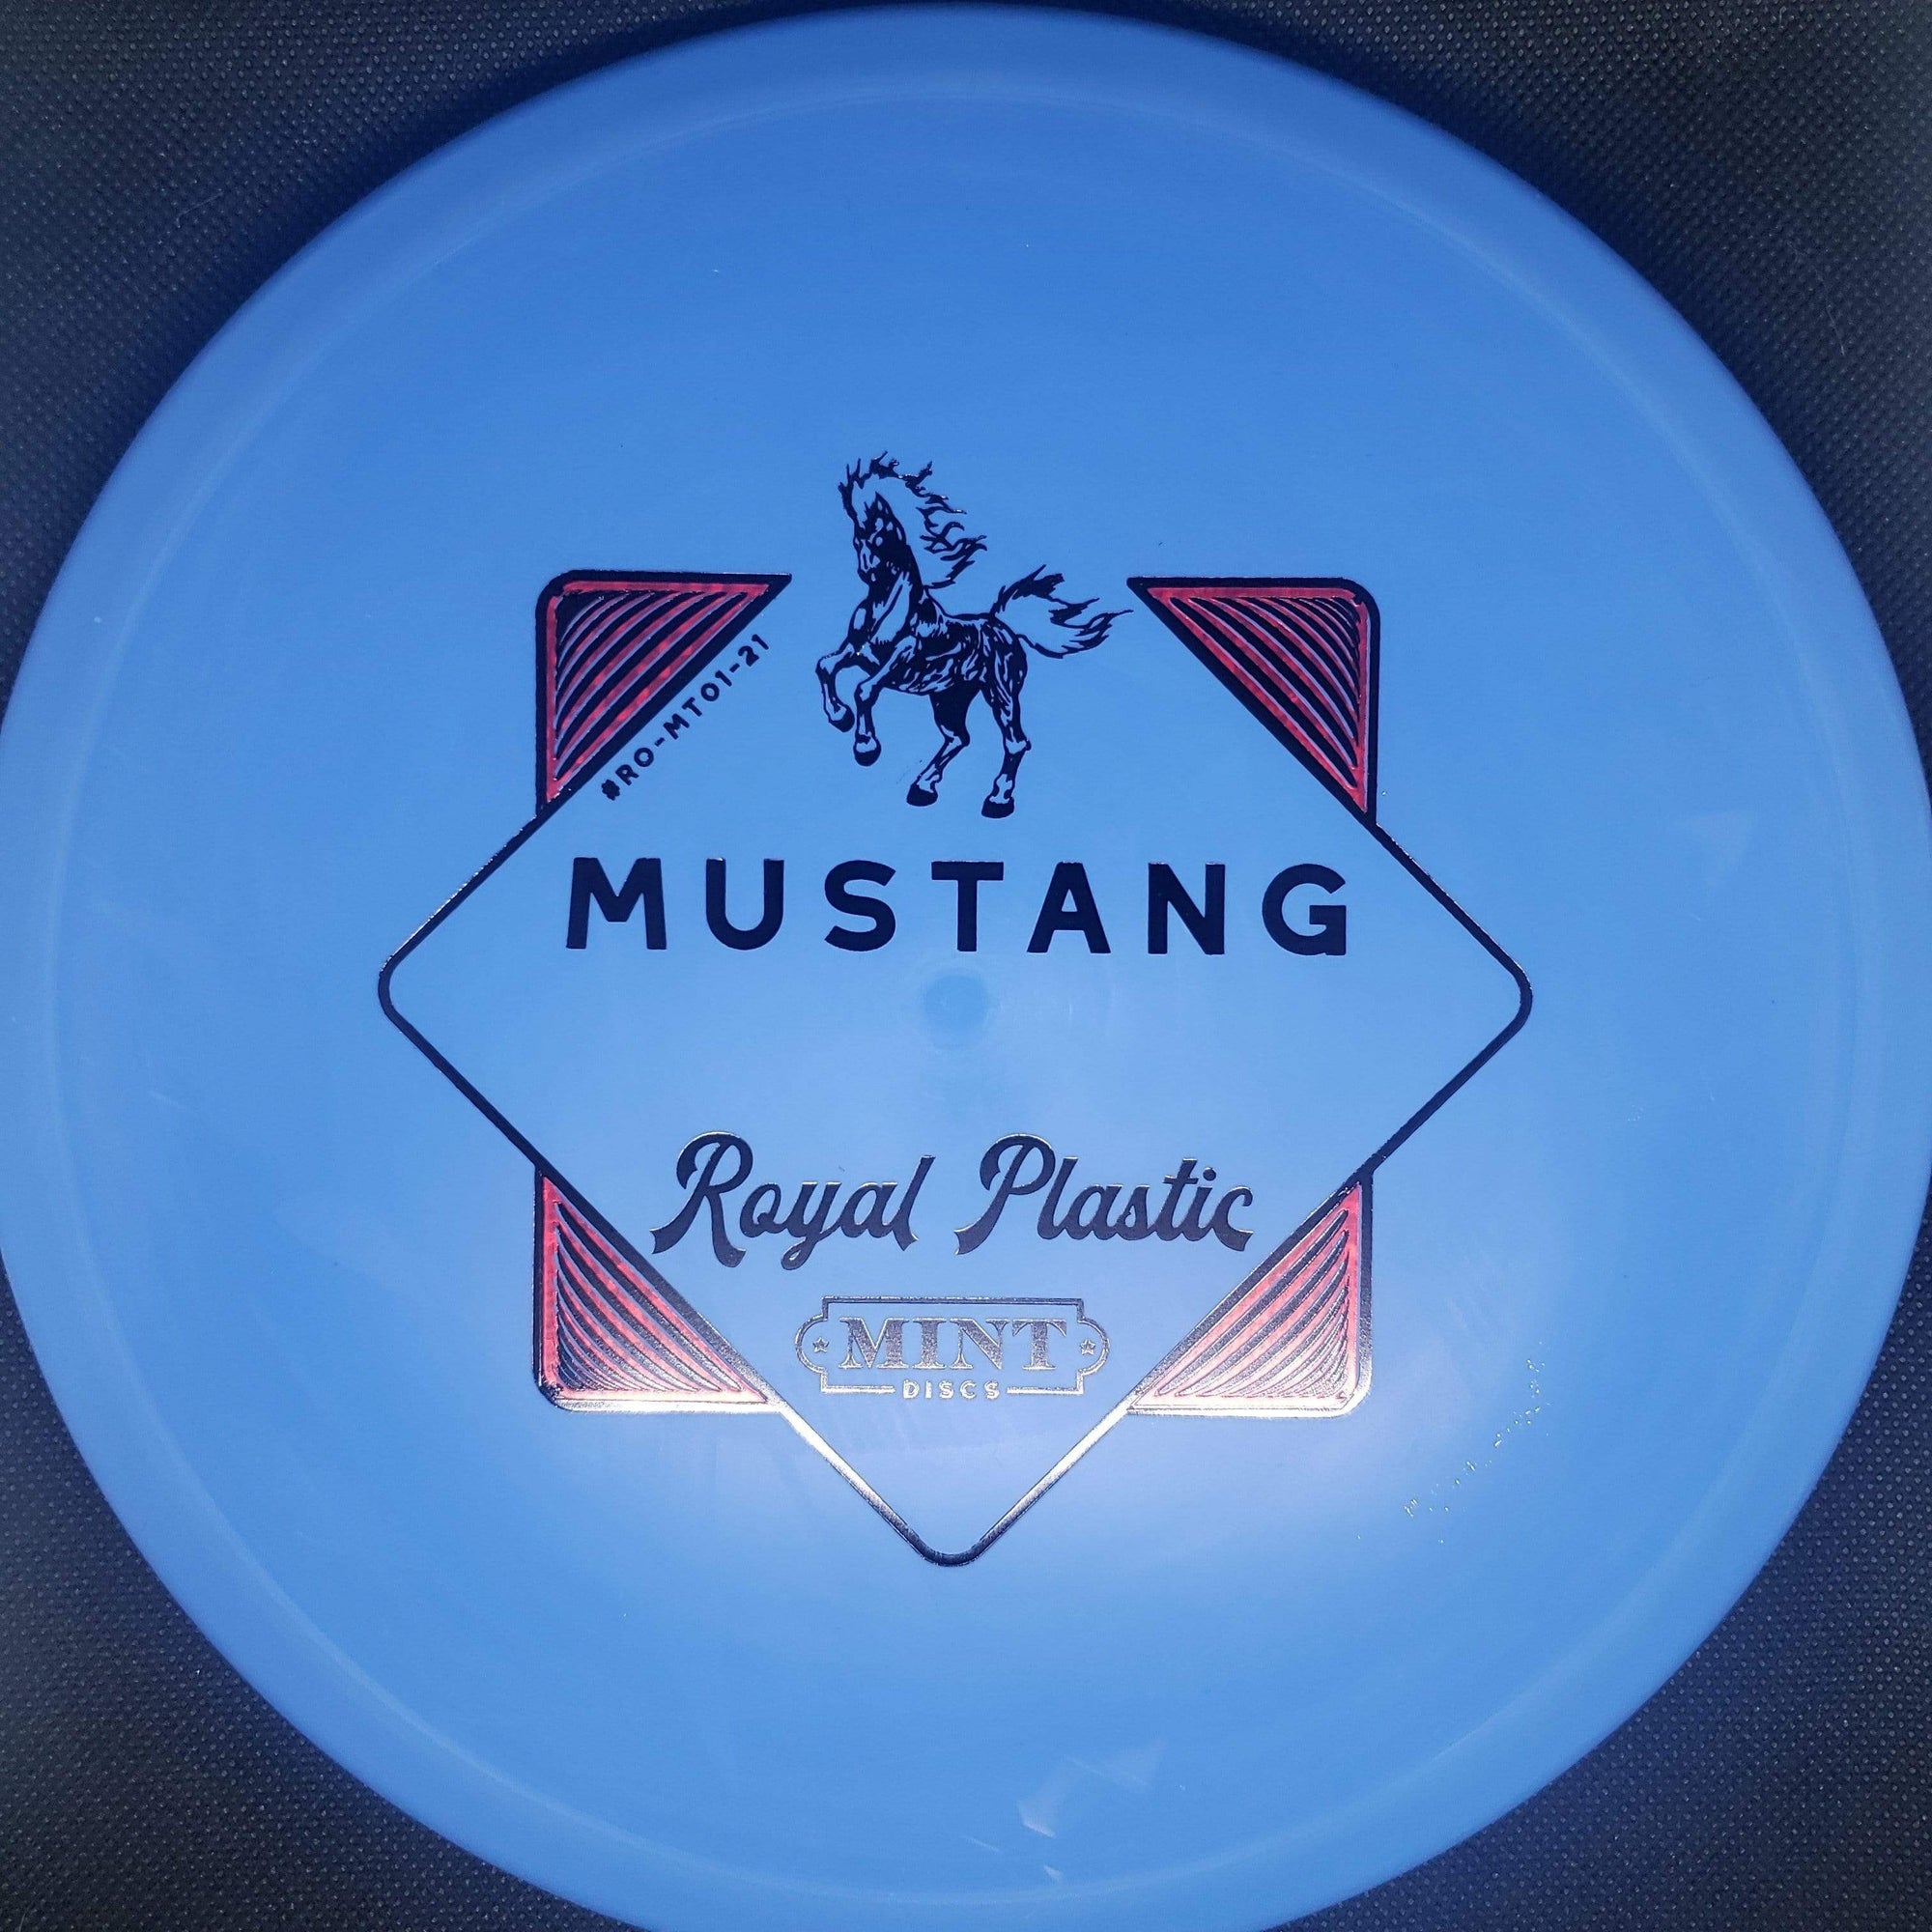 Mint Discs Mid Range Blue Red Stamp 176g Mustang - Royal Plastic